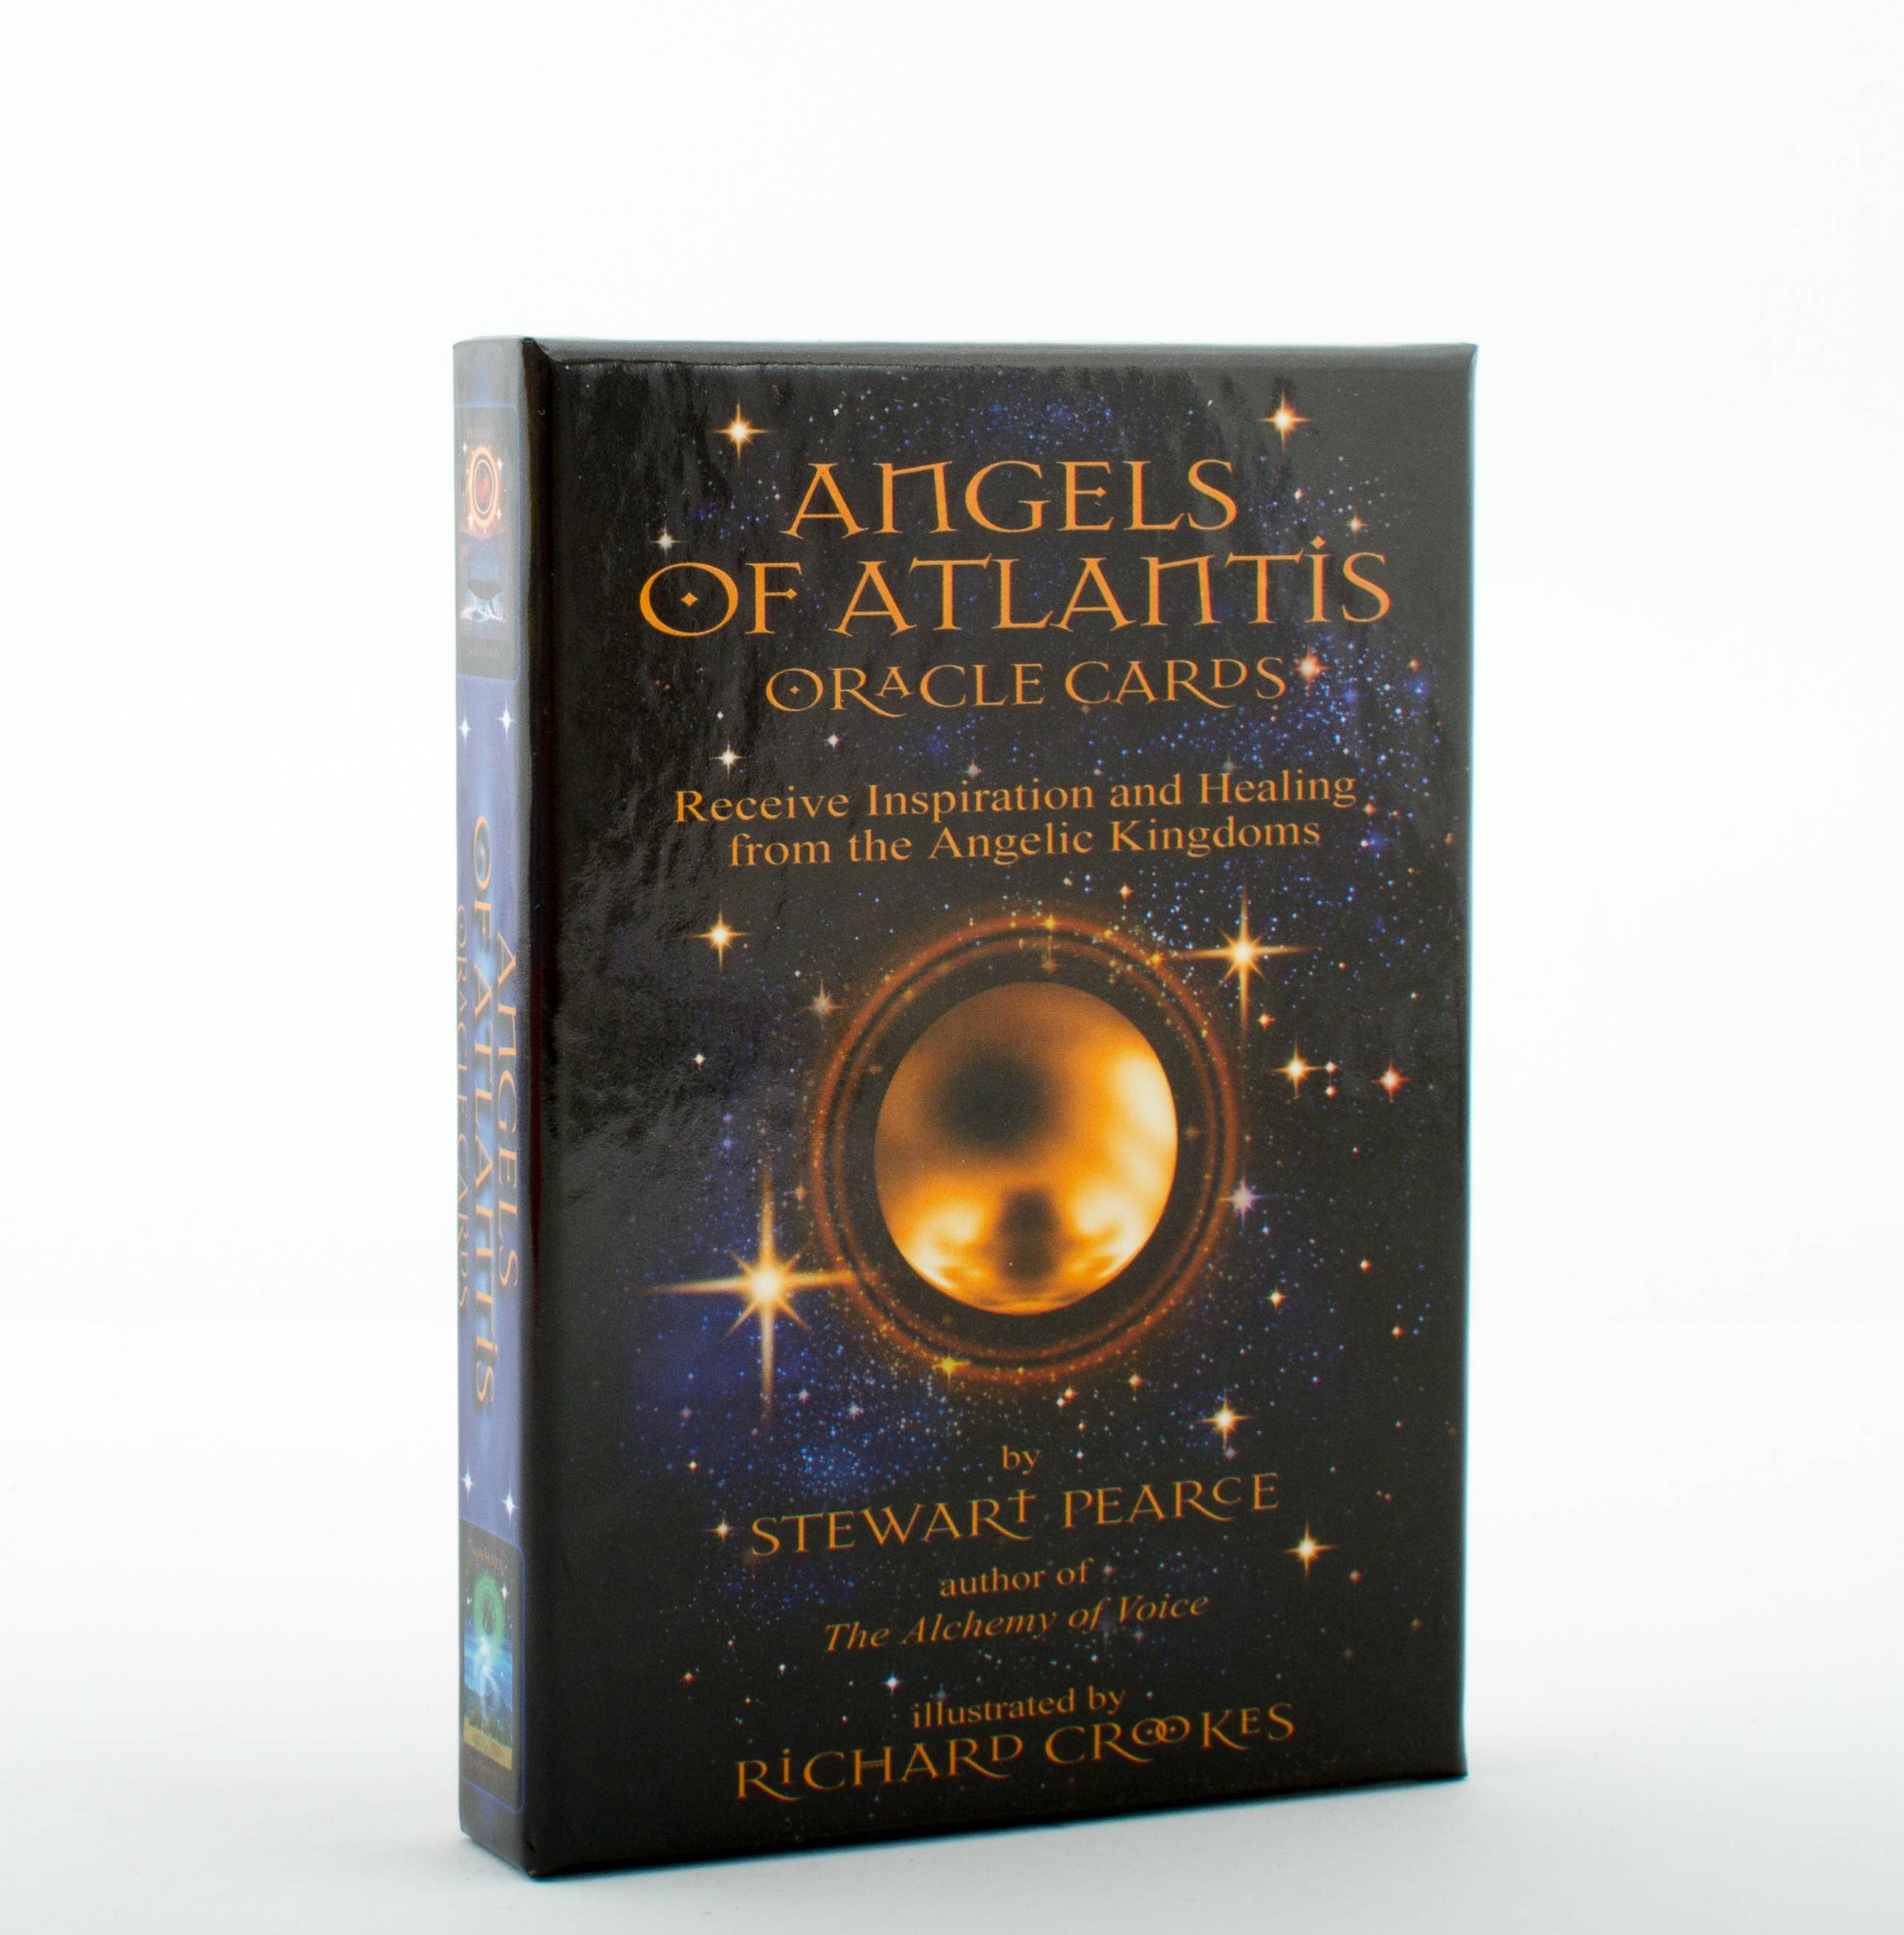 Angels of Atlantis Oracle Cards : Receive Inspiration and Healing from the Angelic Kingdoms